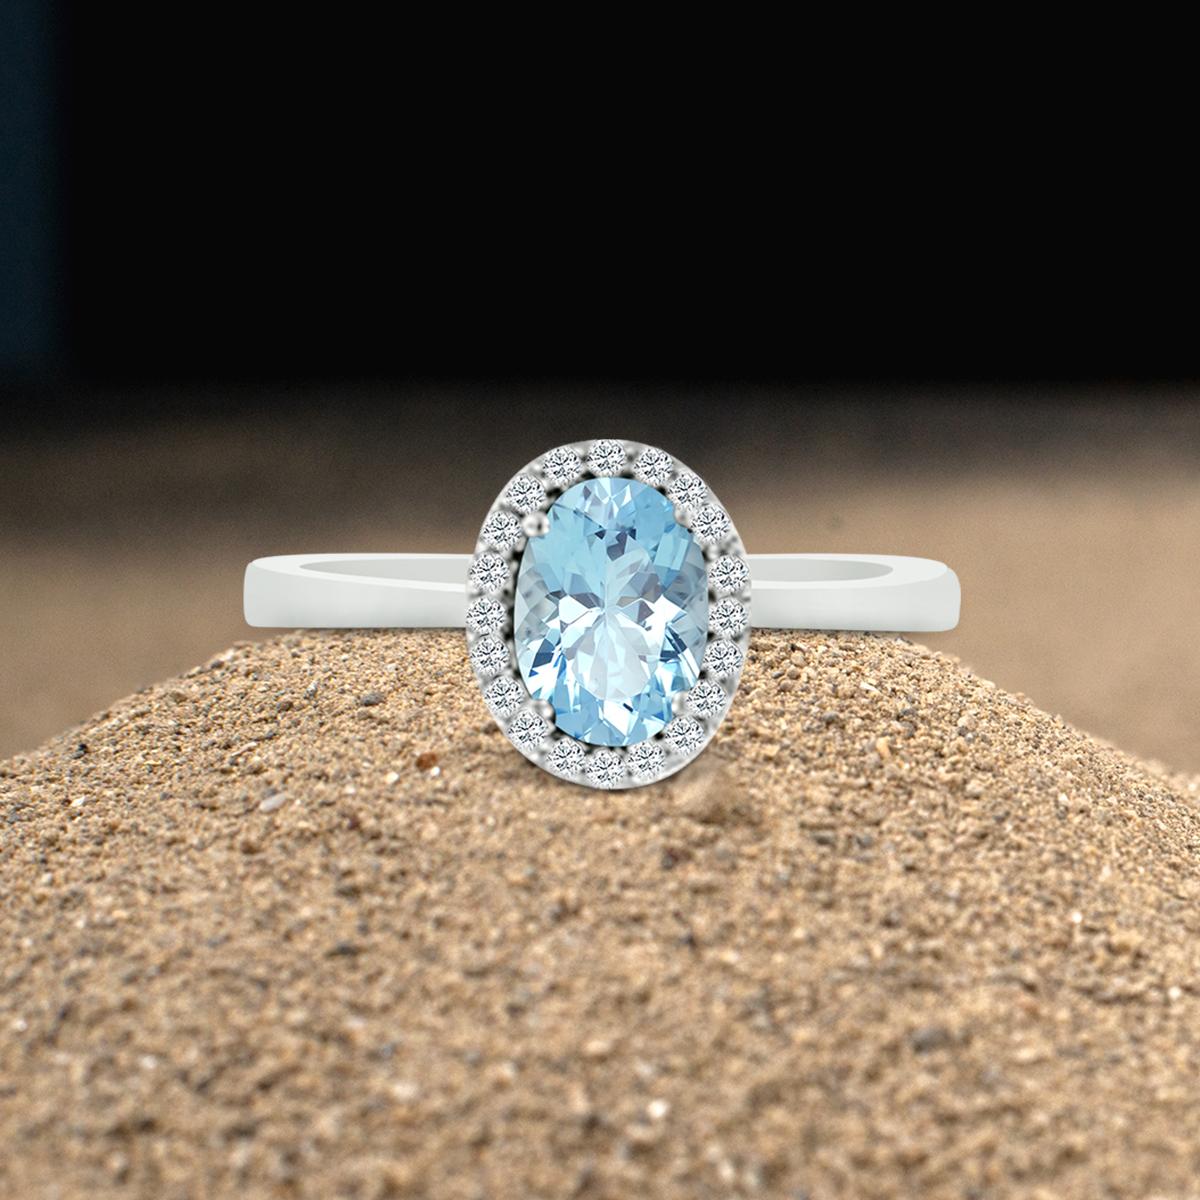 Oval Cut 14k White Gold 0.60cts Aquamarine And Diamond Ring, Style# TS1118AQR 19305/10 For Sale